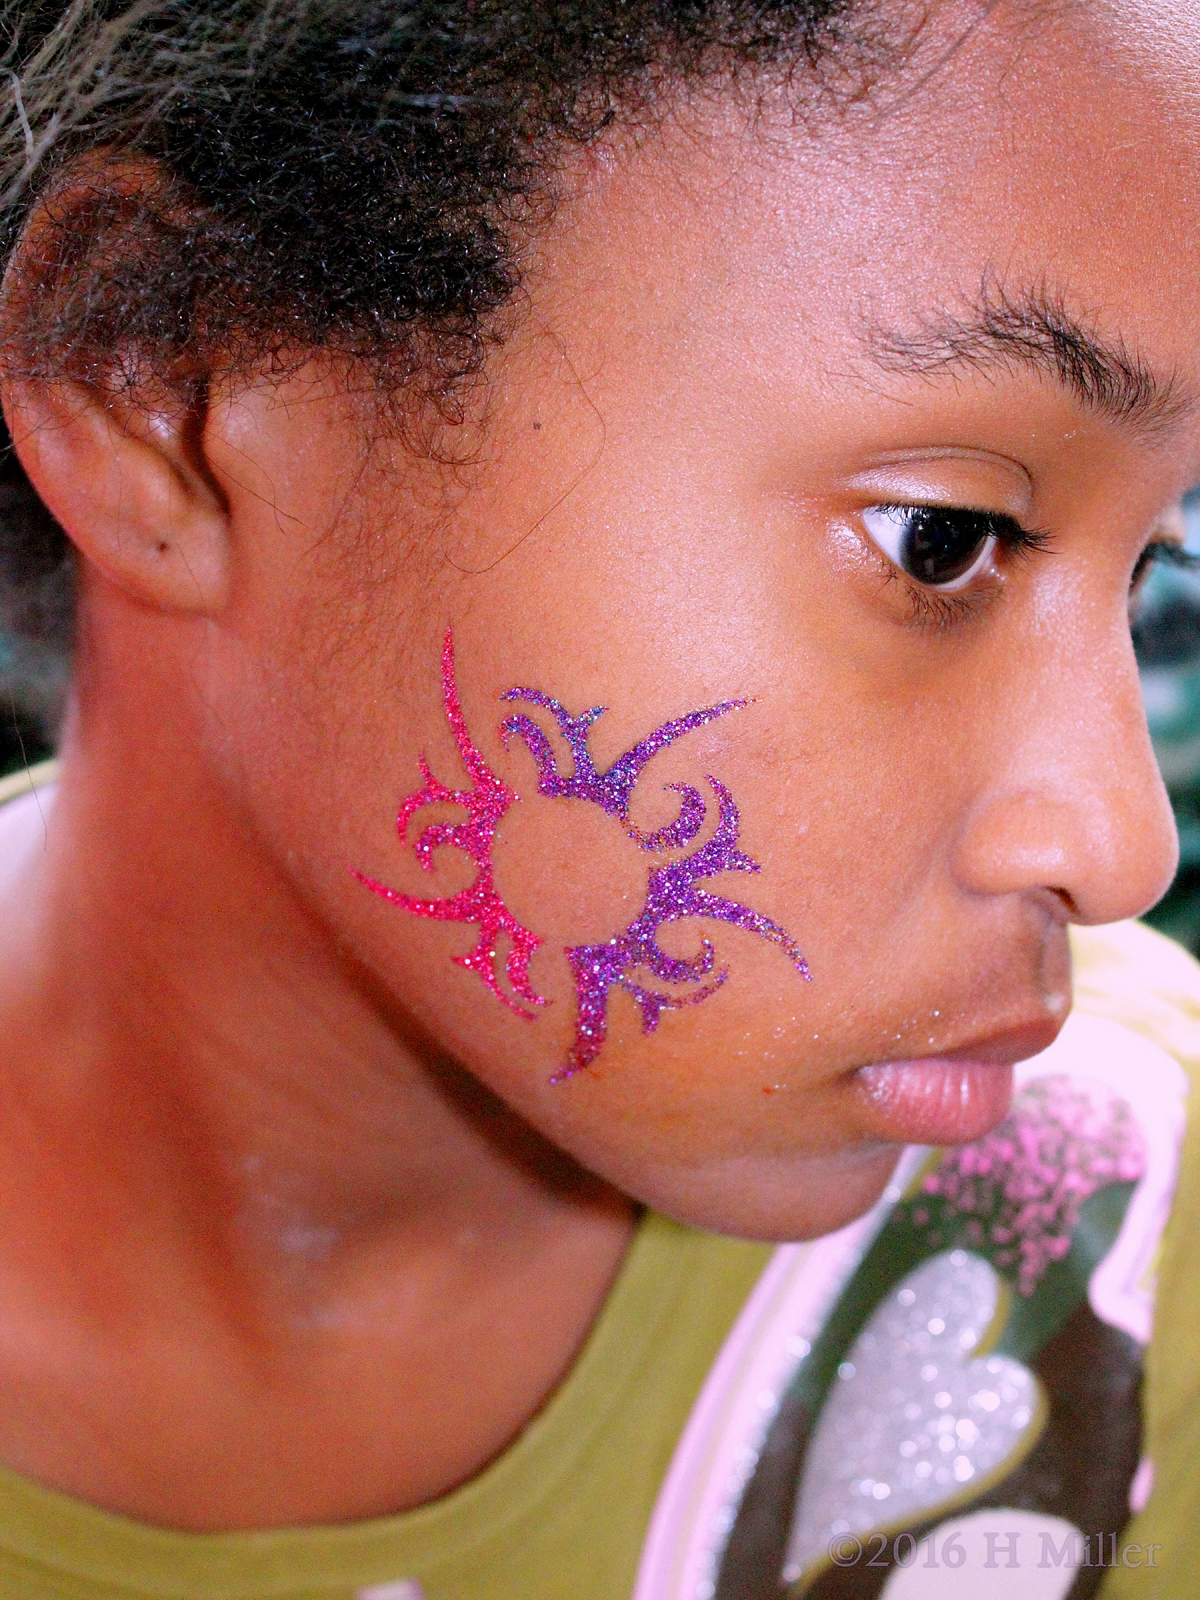 Cool Pink And Purple Glitter Temporary Tattoo At The Kids Spa Party! 